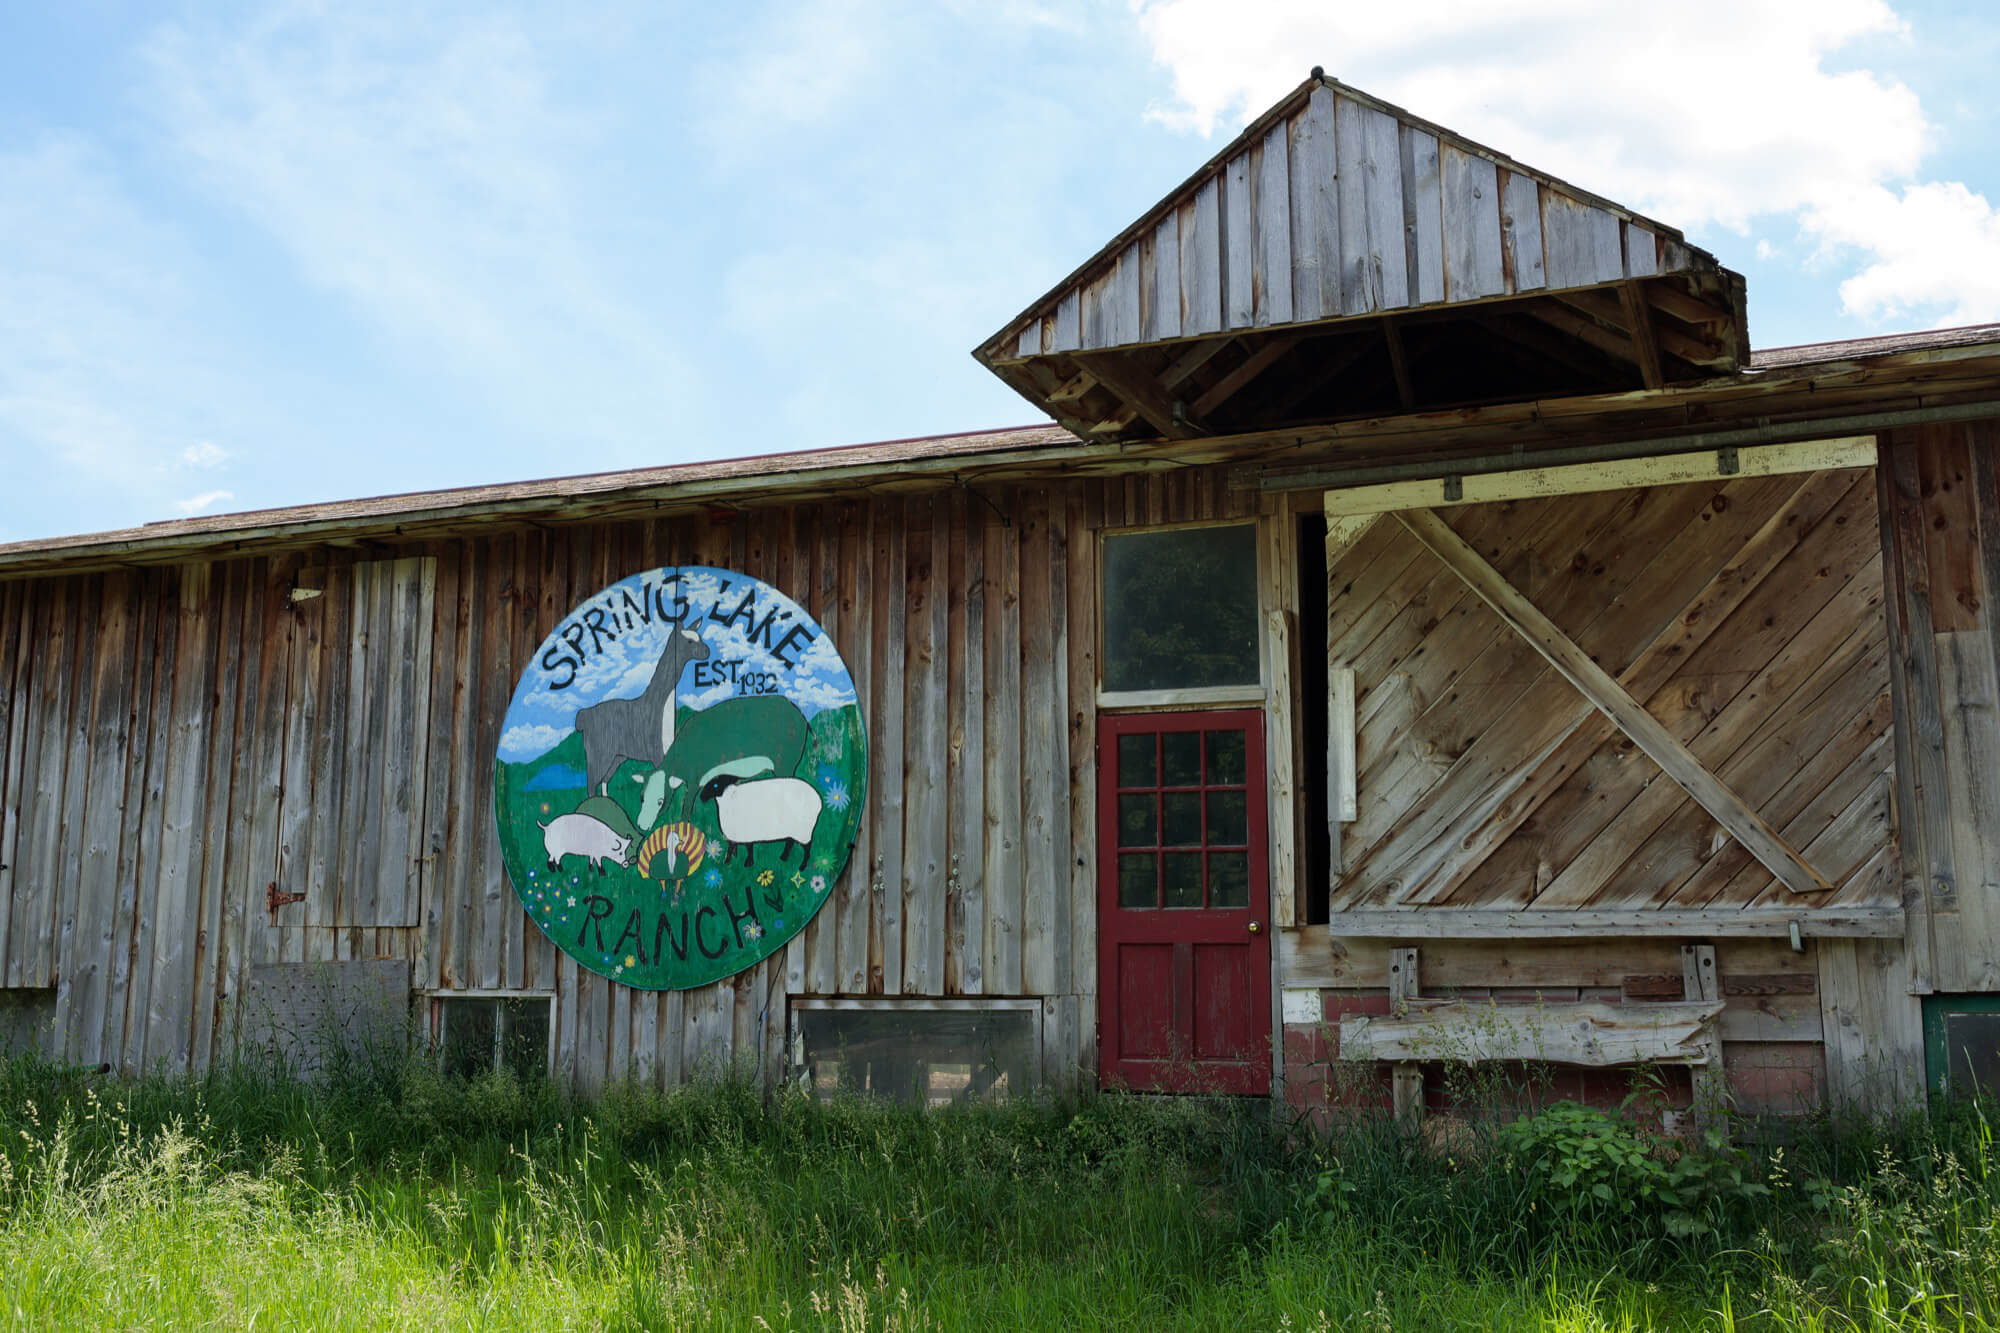 wood building with spring lake ranch sign